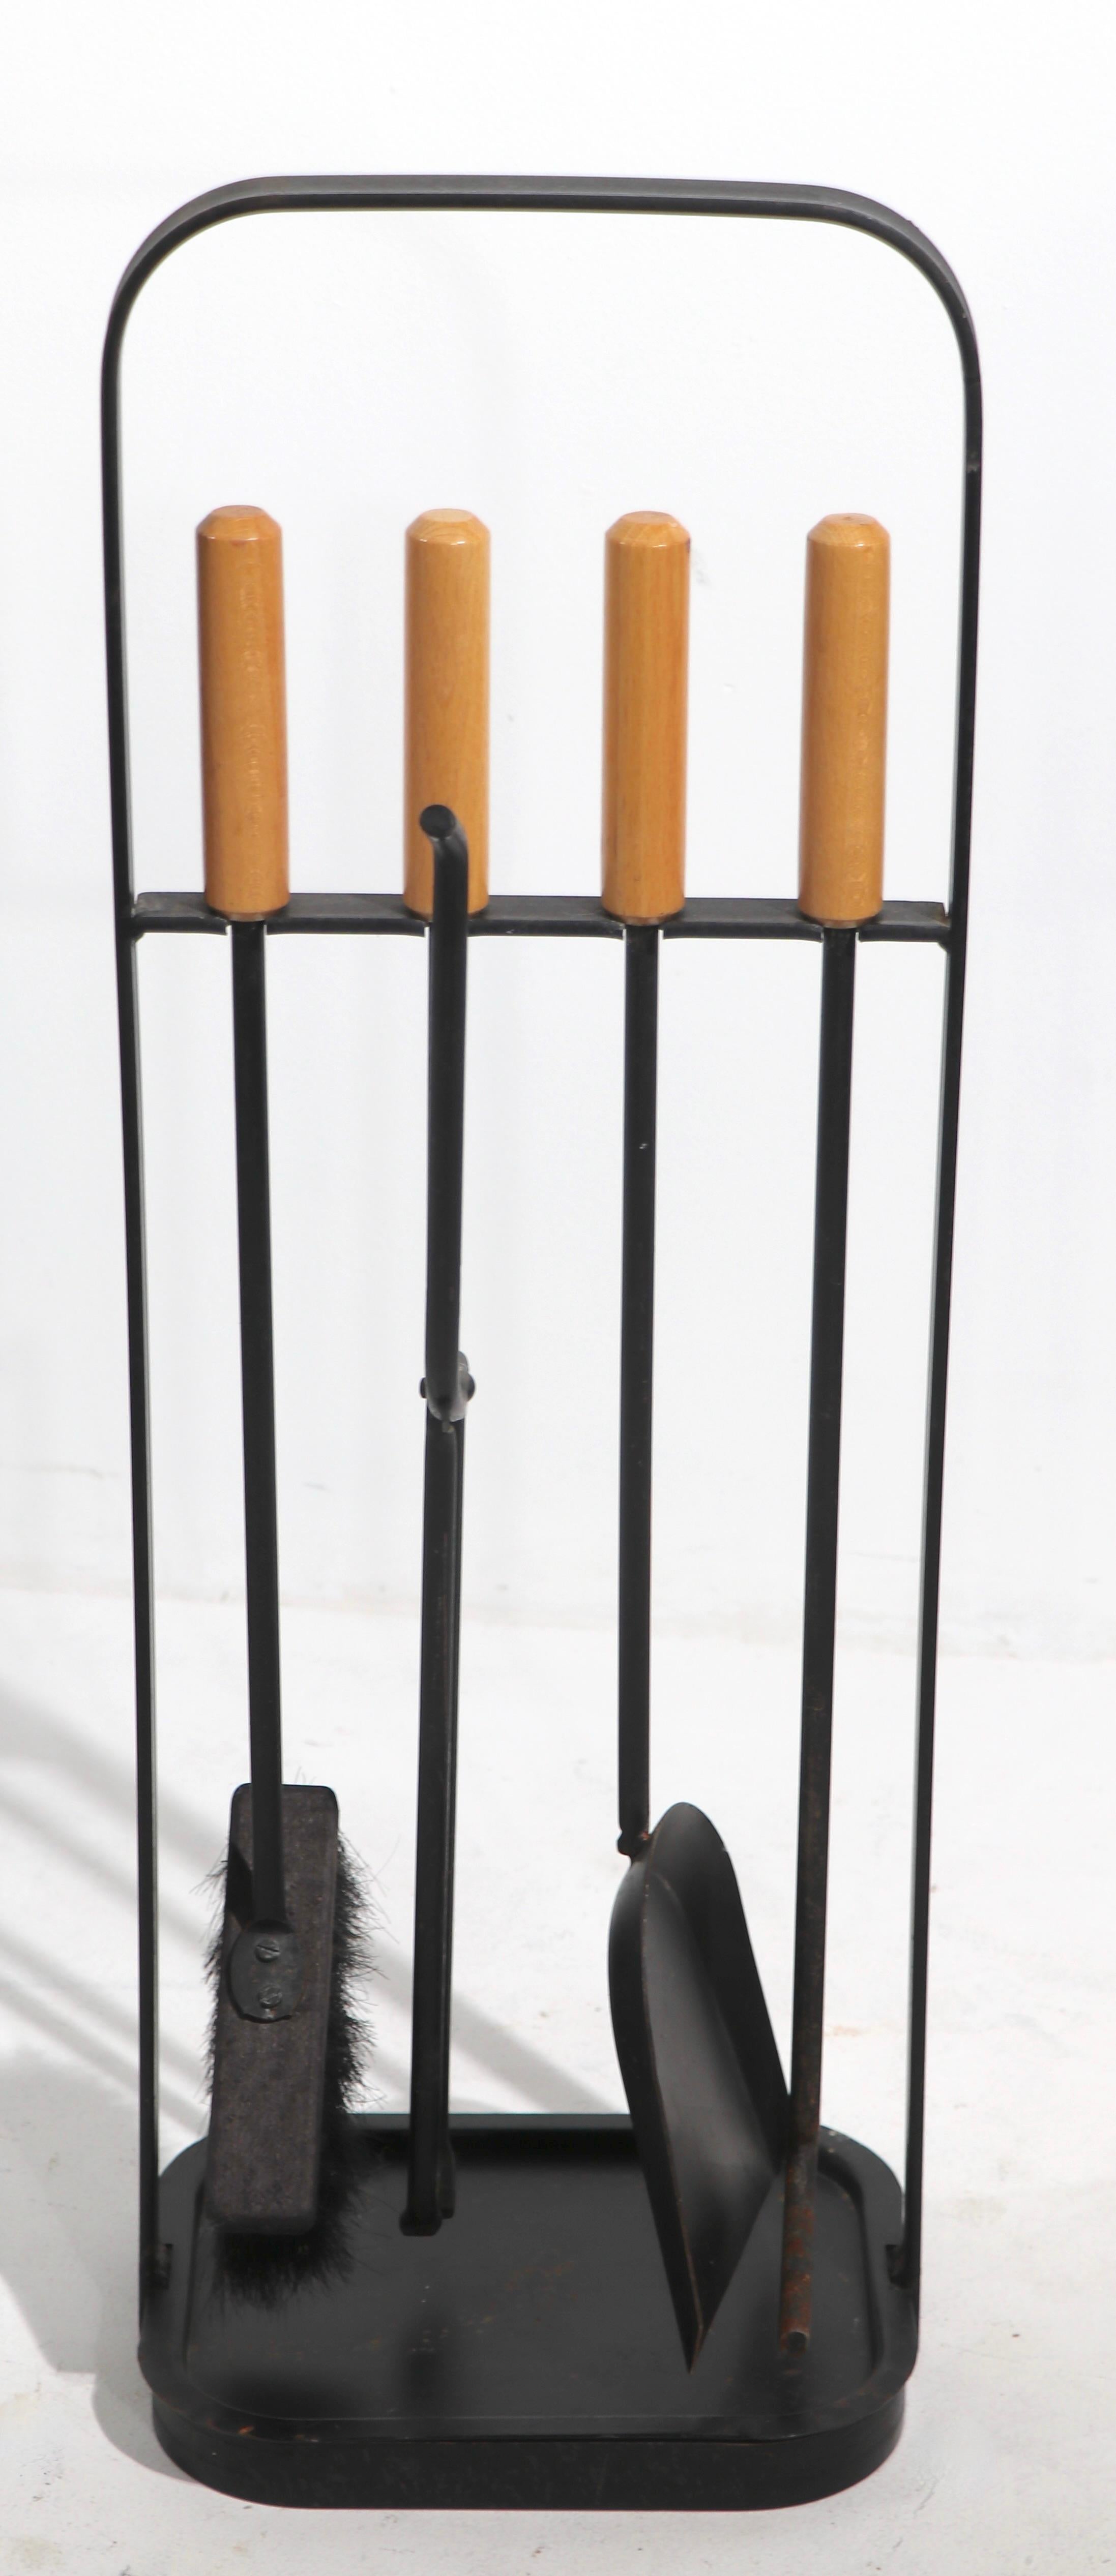 Stylish and whelk crafted freestanding fireplace tool set, of wrought iron and wood. This set consists of four tools, brush, shovel, tongs and poker, and the stand. This example is in very good original condition, clean and ready to use.